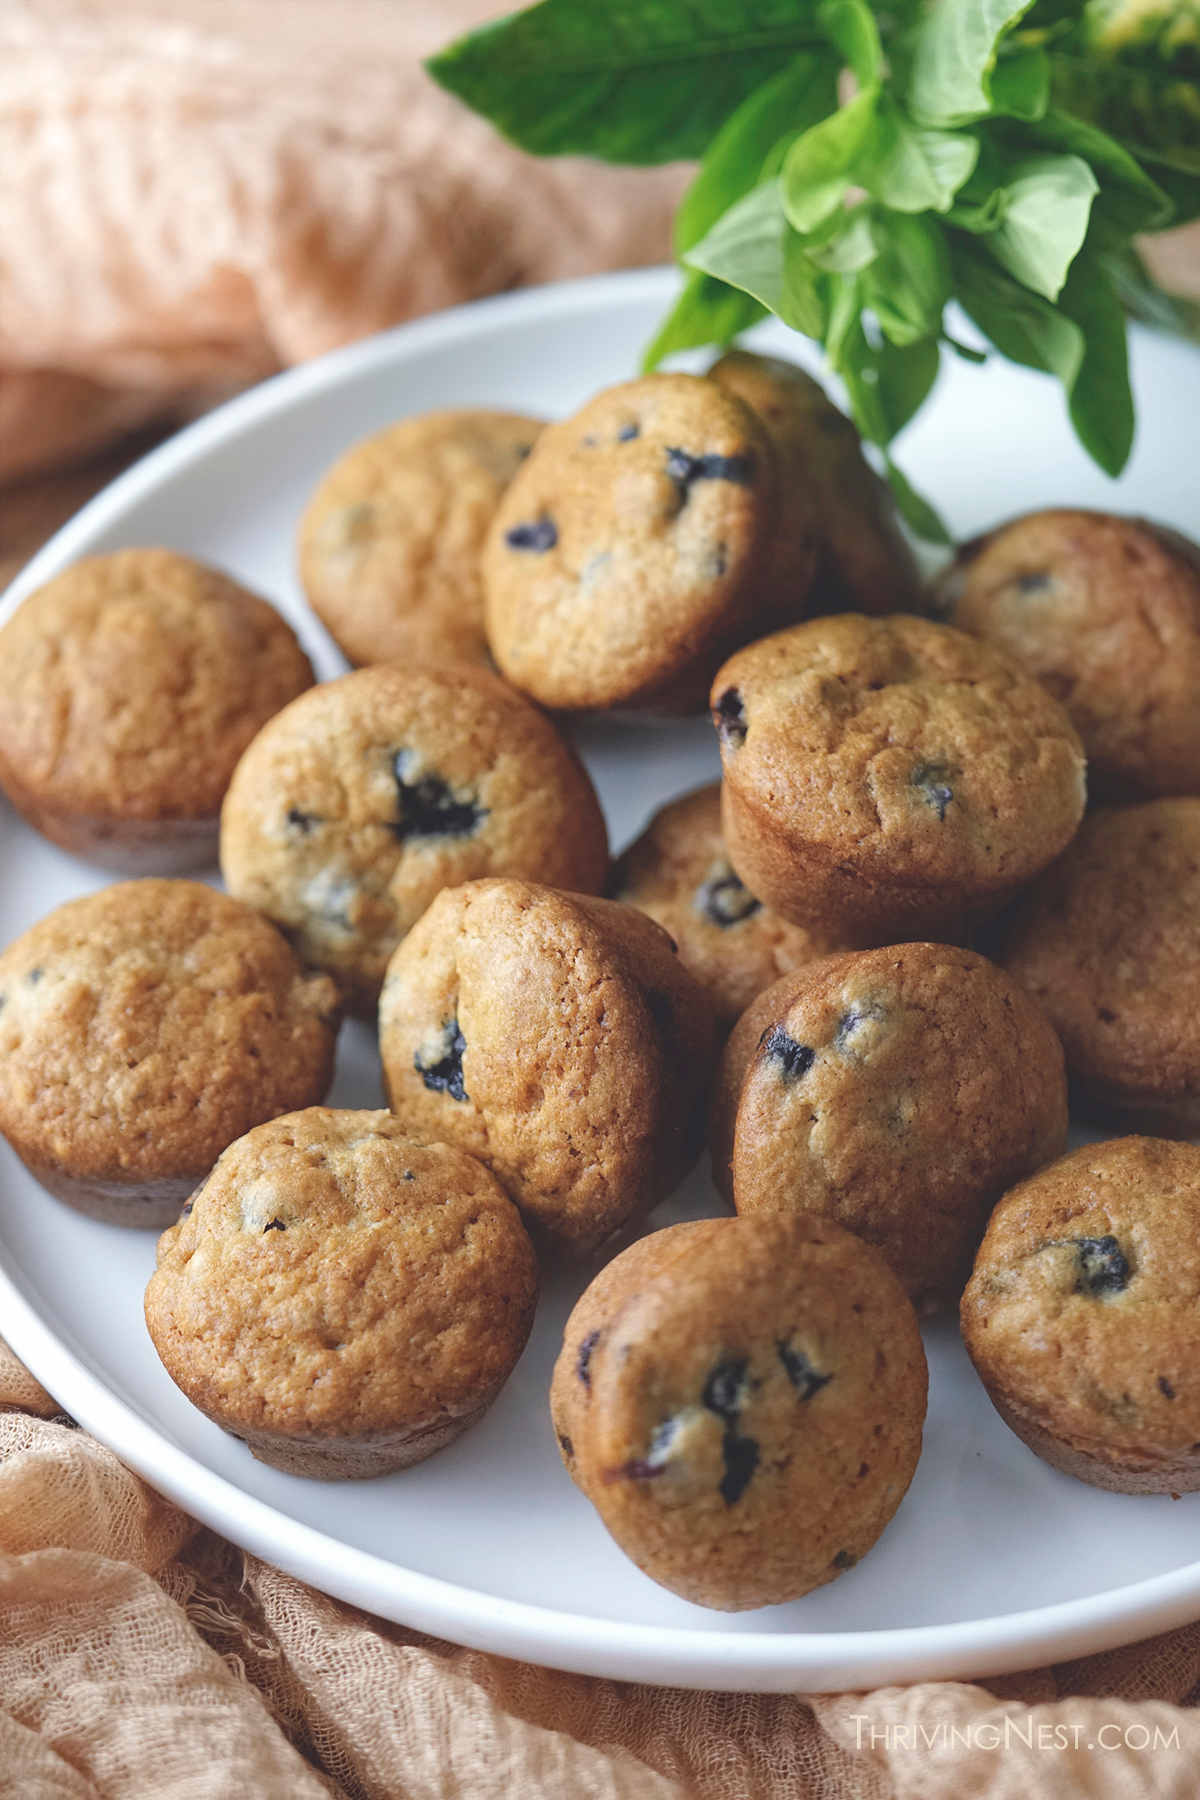 Healthy easy baby blueberry muffins for baby led weaning or as finger food.